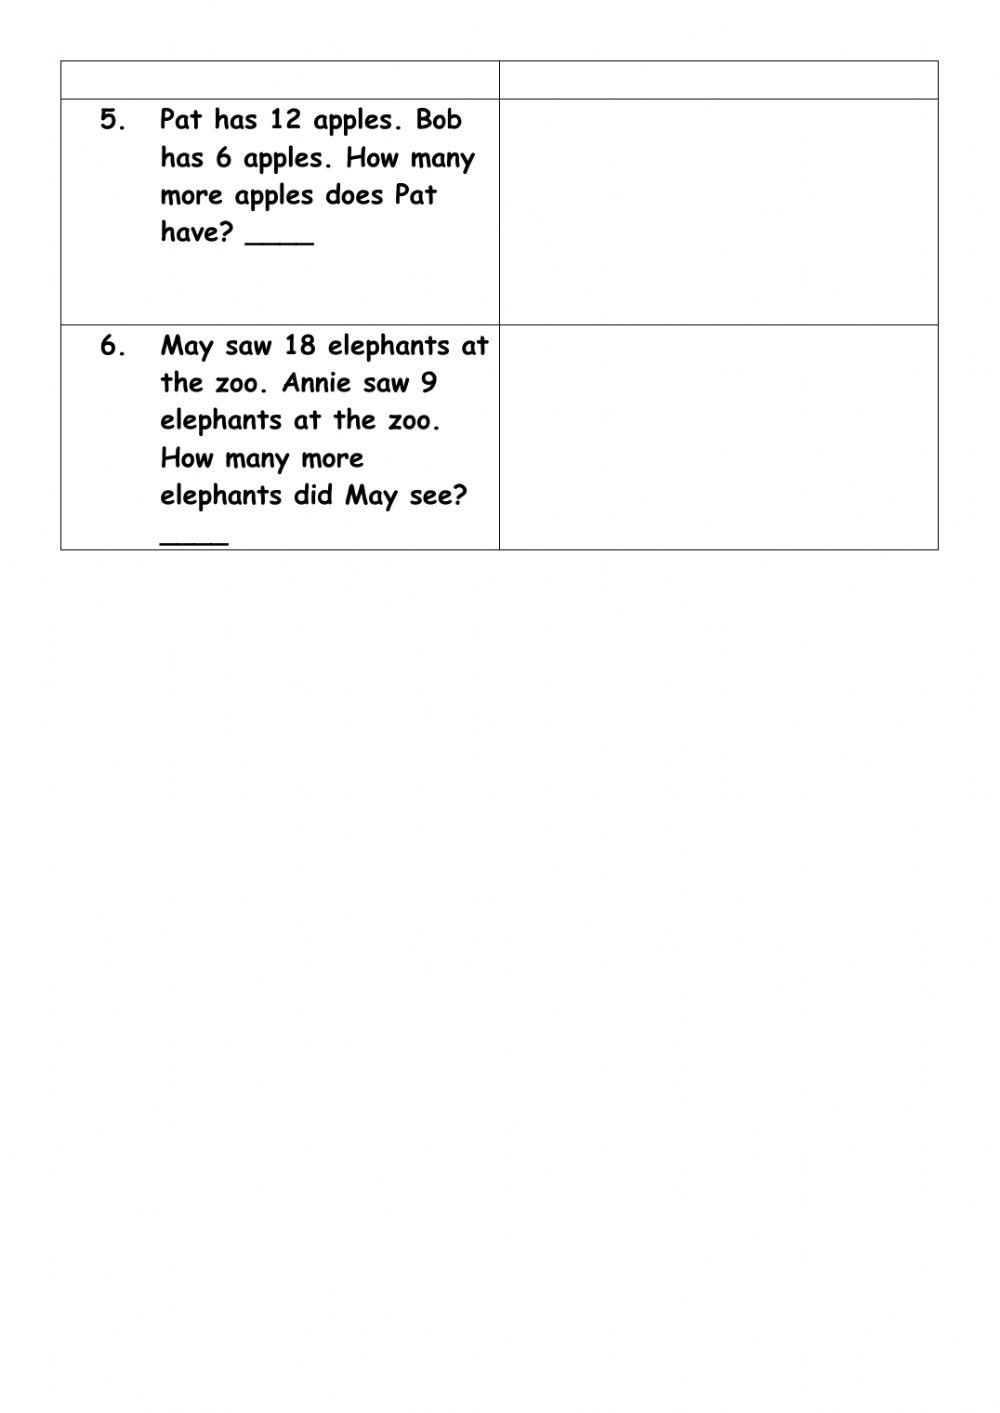 Mathematics word Problems Subtraction facts to 20 Classwork